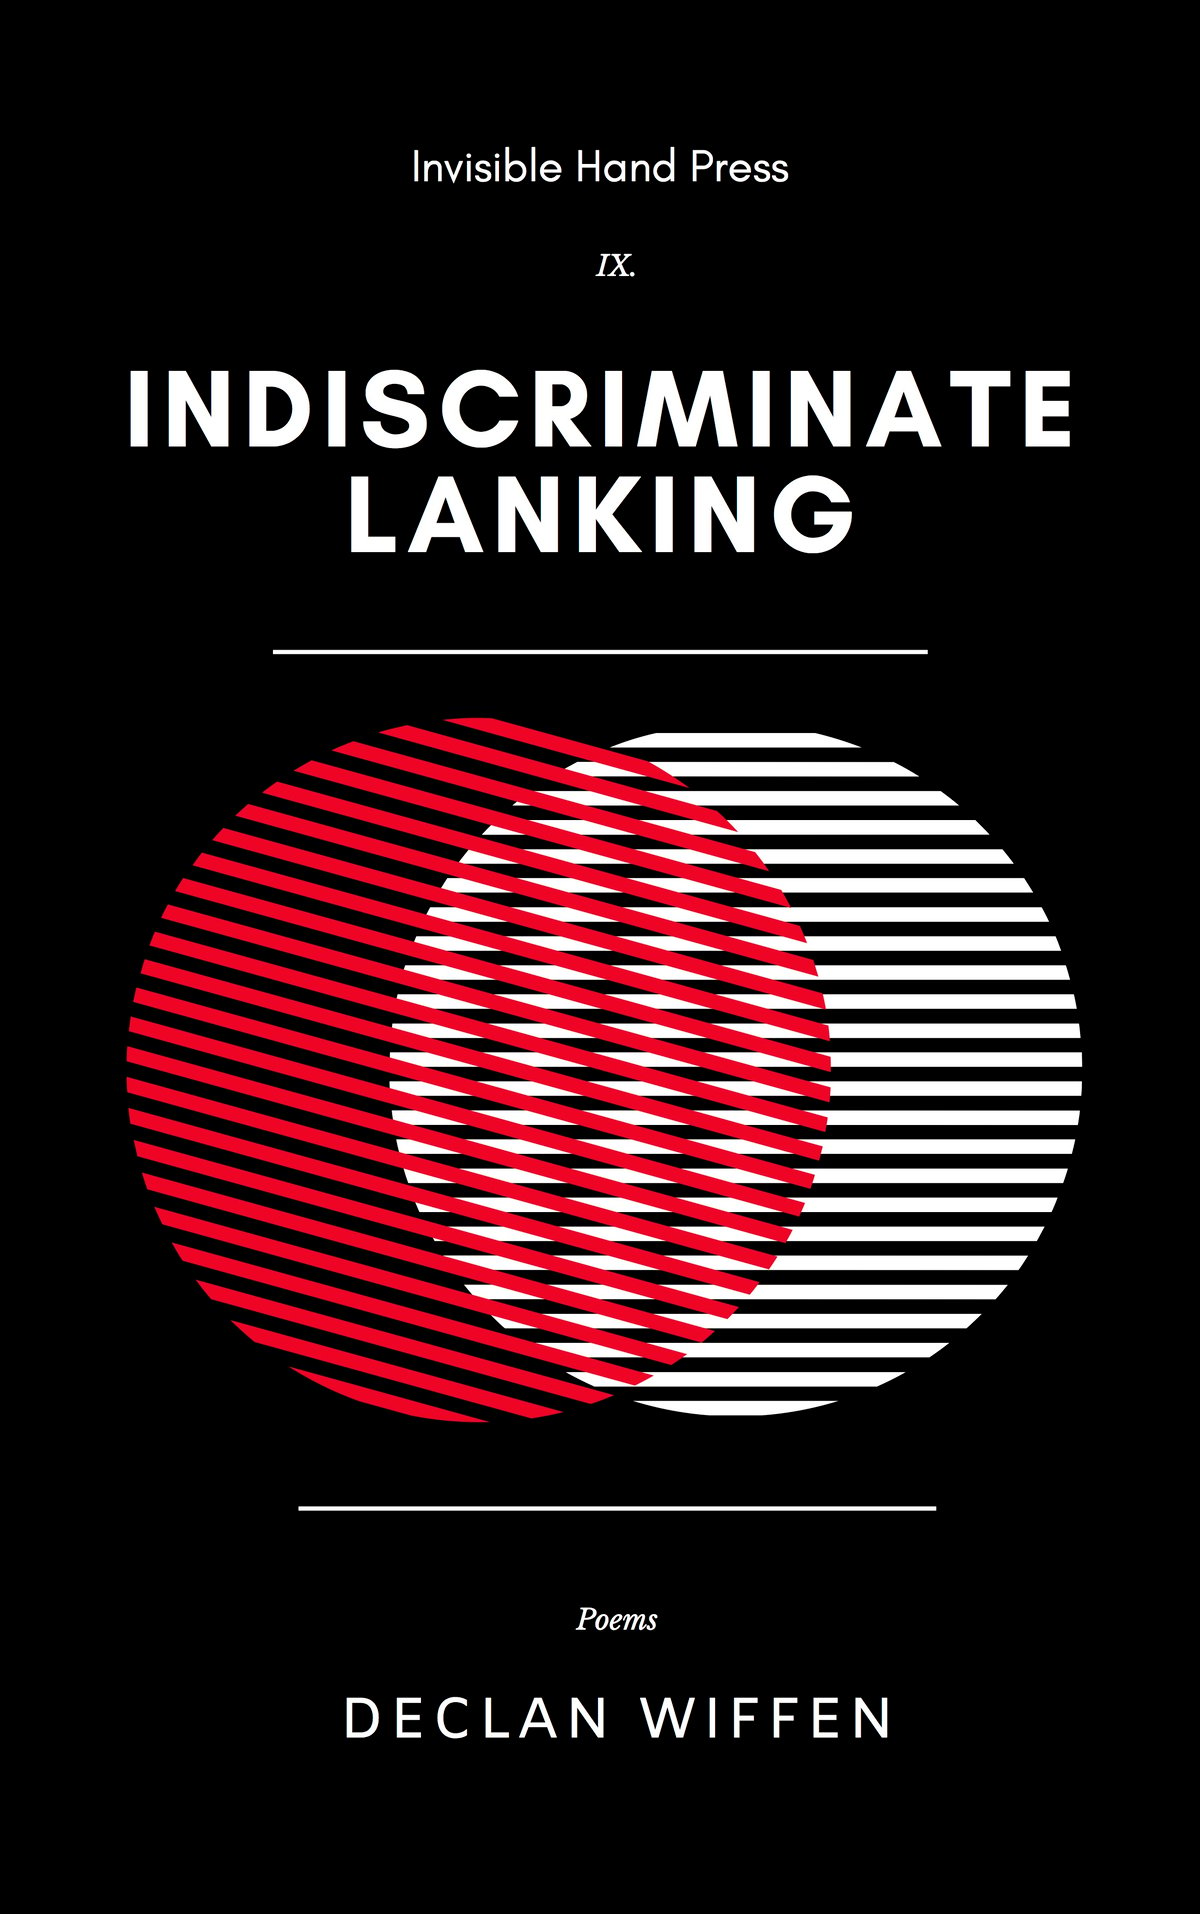 Image of indiscriminate lanking by declan wiffen